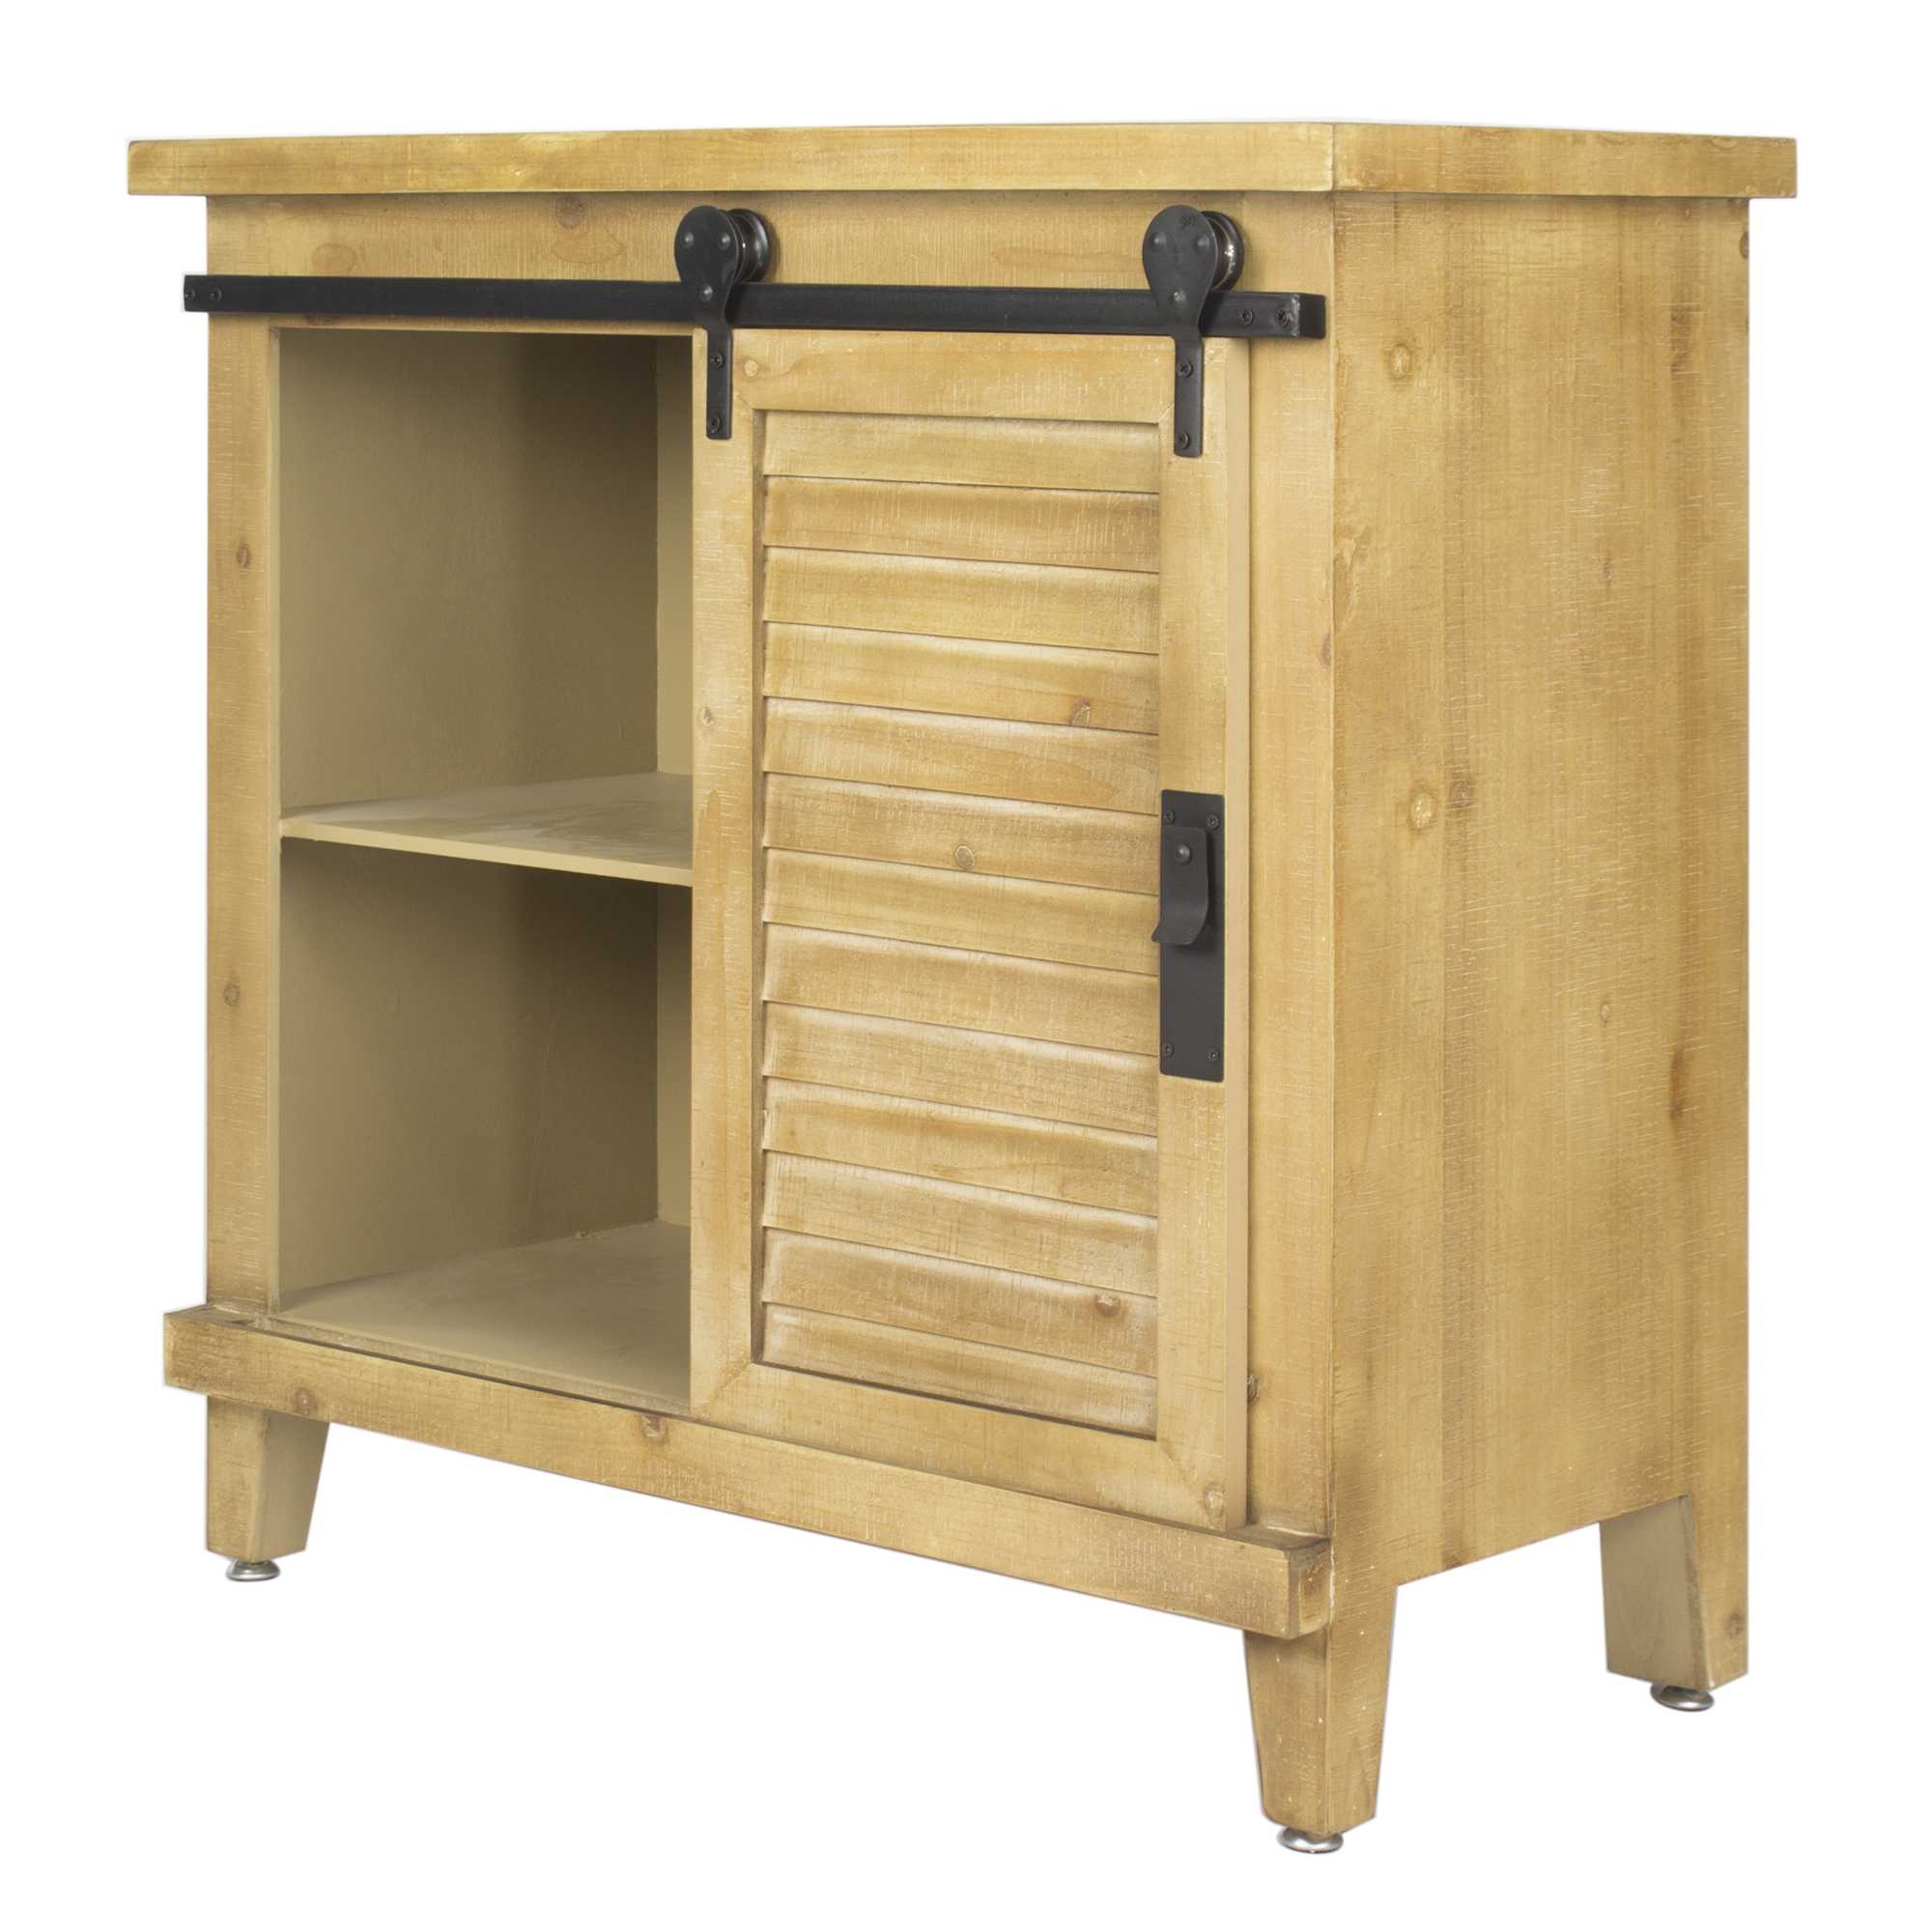 31" X 15" X 30" Natural Wood Iron Wood MDF Accent Cabinet with Doors and Drawers